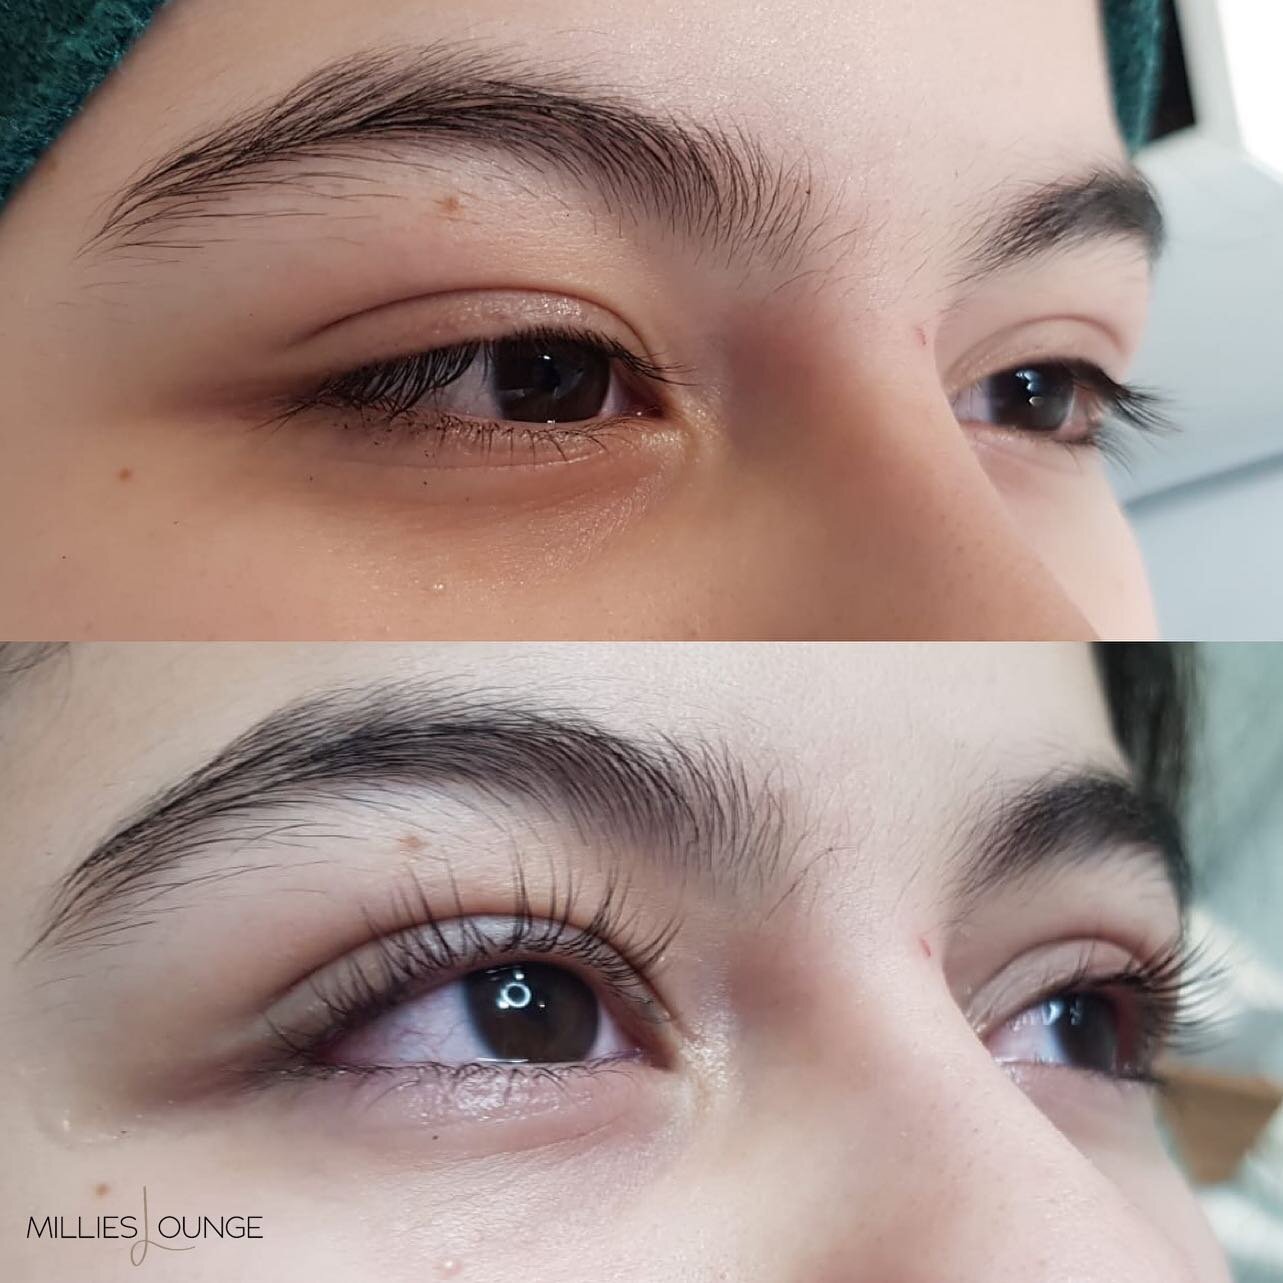 LVL EYELASH LIFT @ Millies Lounge, Clapham Common

See our website for our latest beauty deals handpicked for you!

www.millieslounge.co.uk

#millieslounge #claphamcommon #lvllashliftandtint #lvlbeforeandafter #claphamlashes